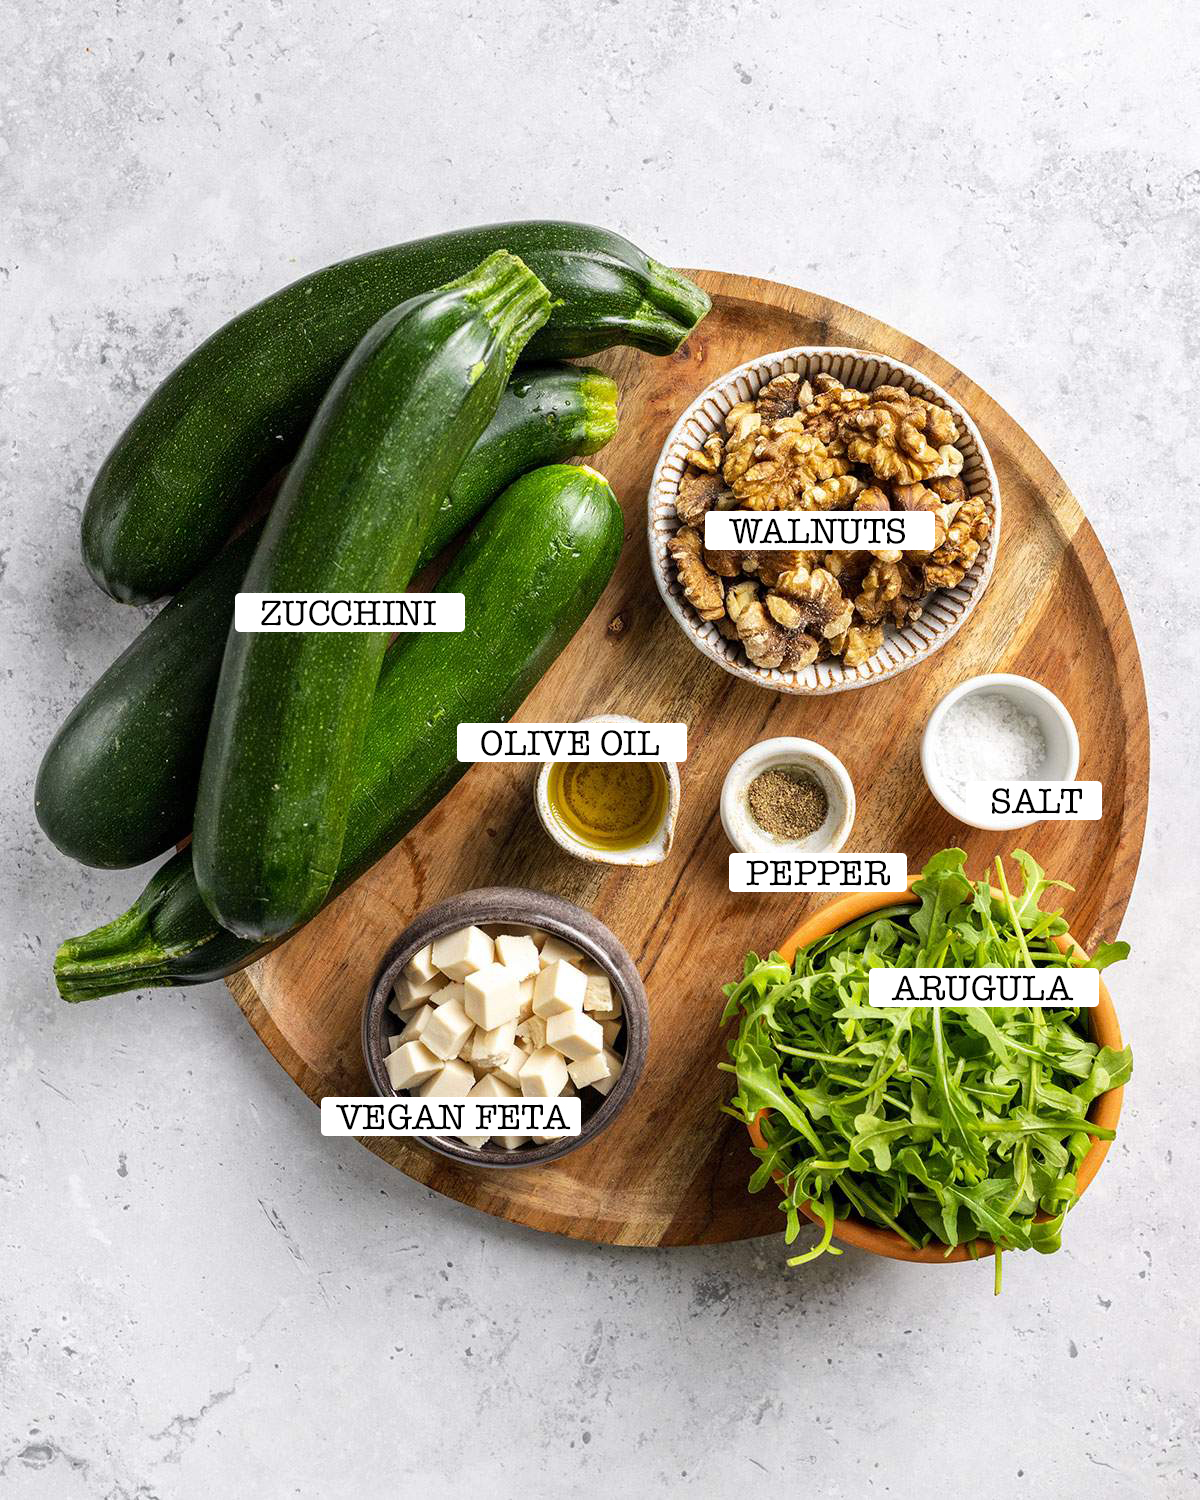 The ingredients for grilled zucchini salad with walnuts and vegan feta are sitting on a wooden tray with labels.